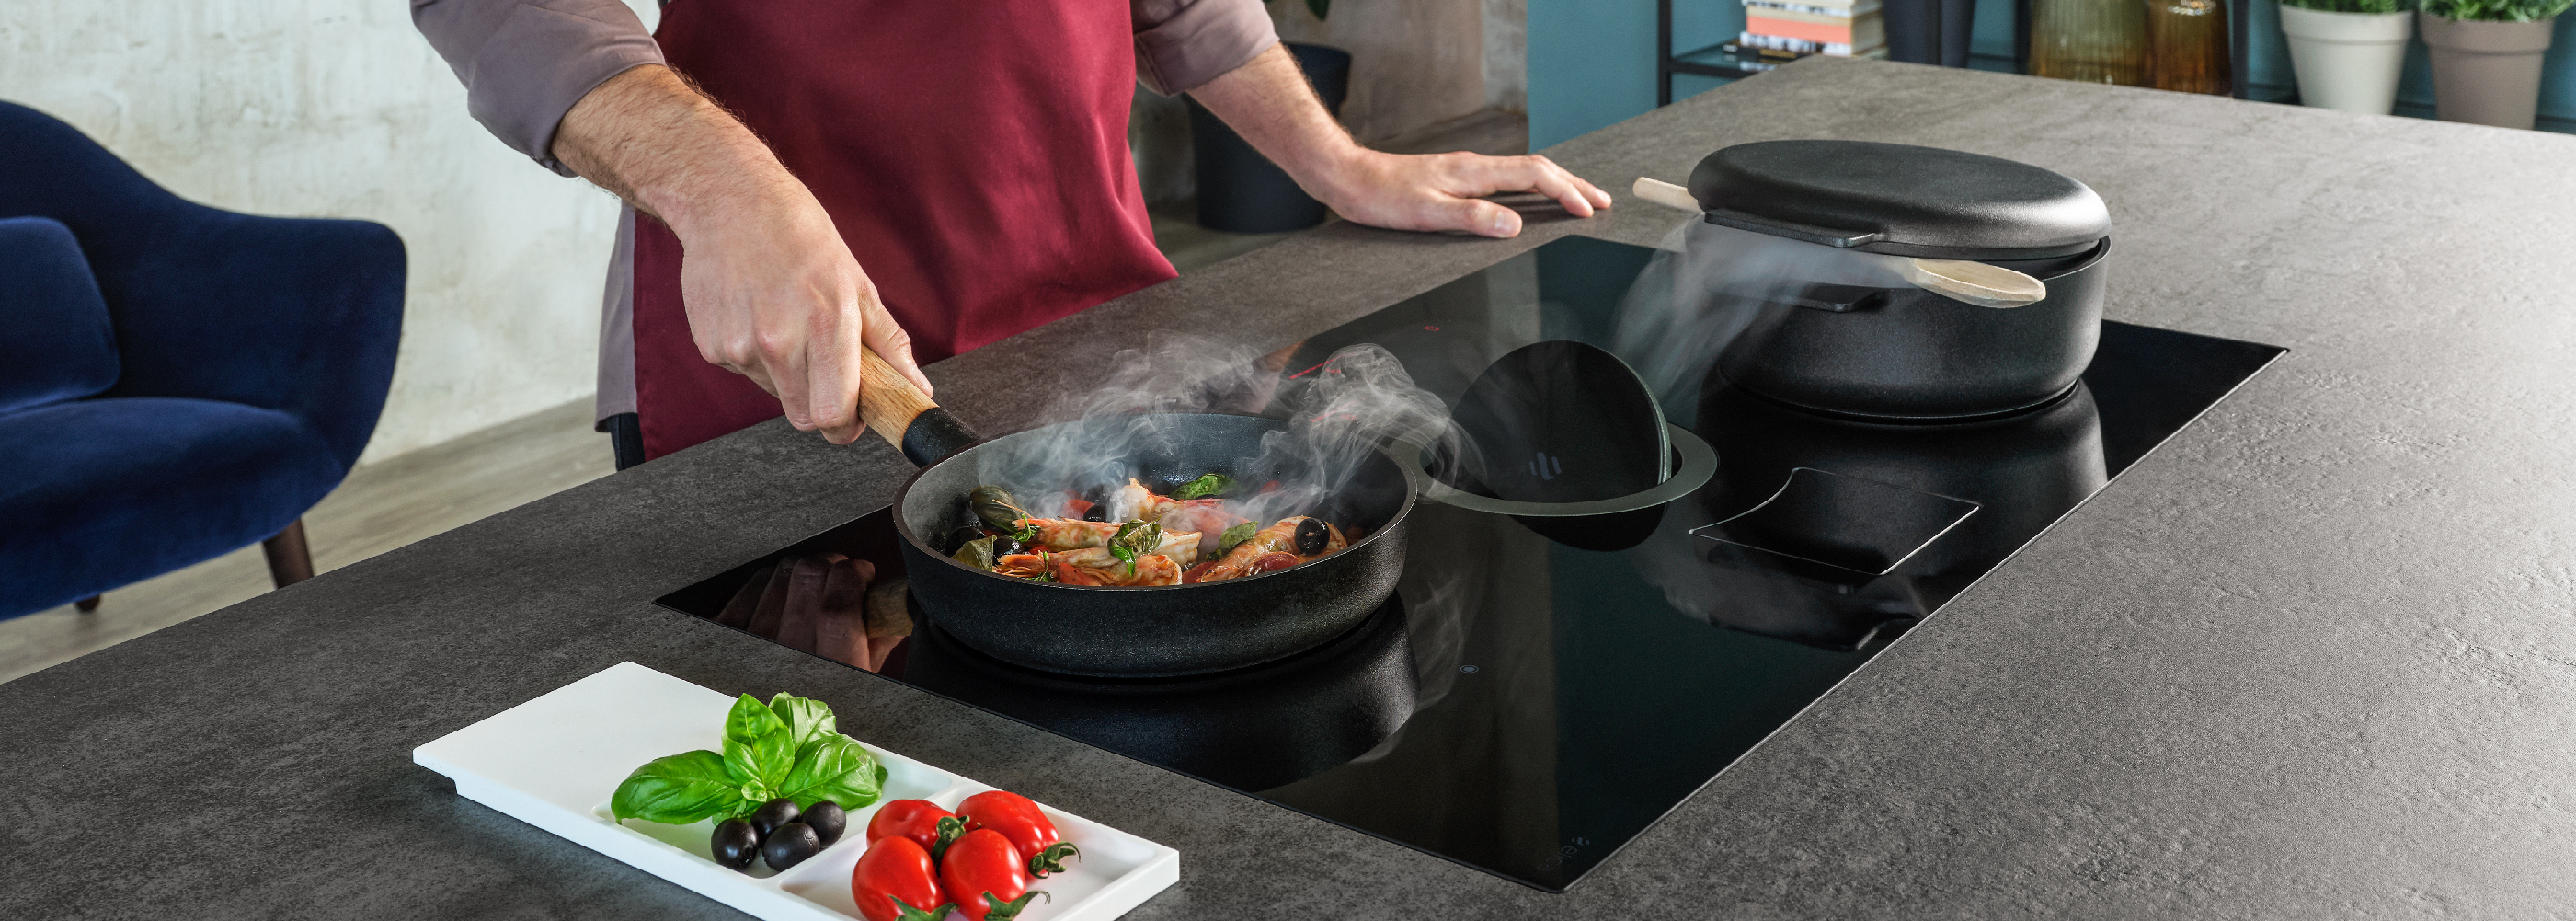 Reasons for having an induction cooktop